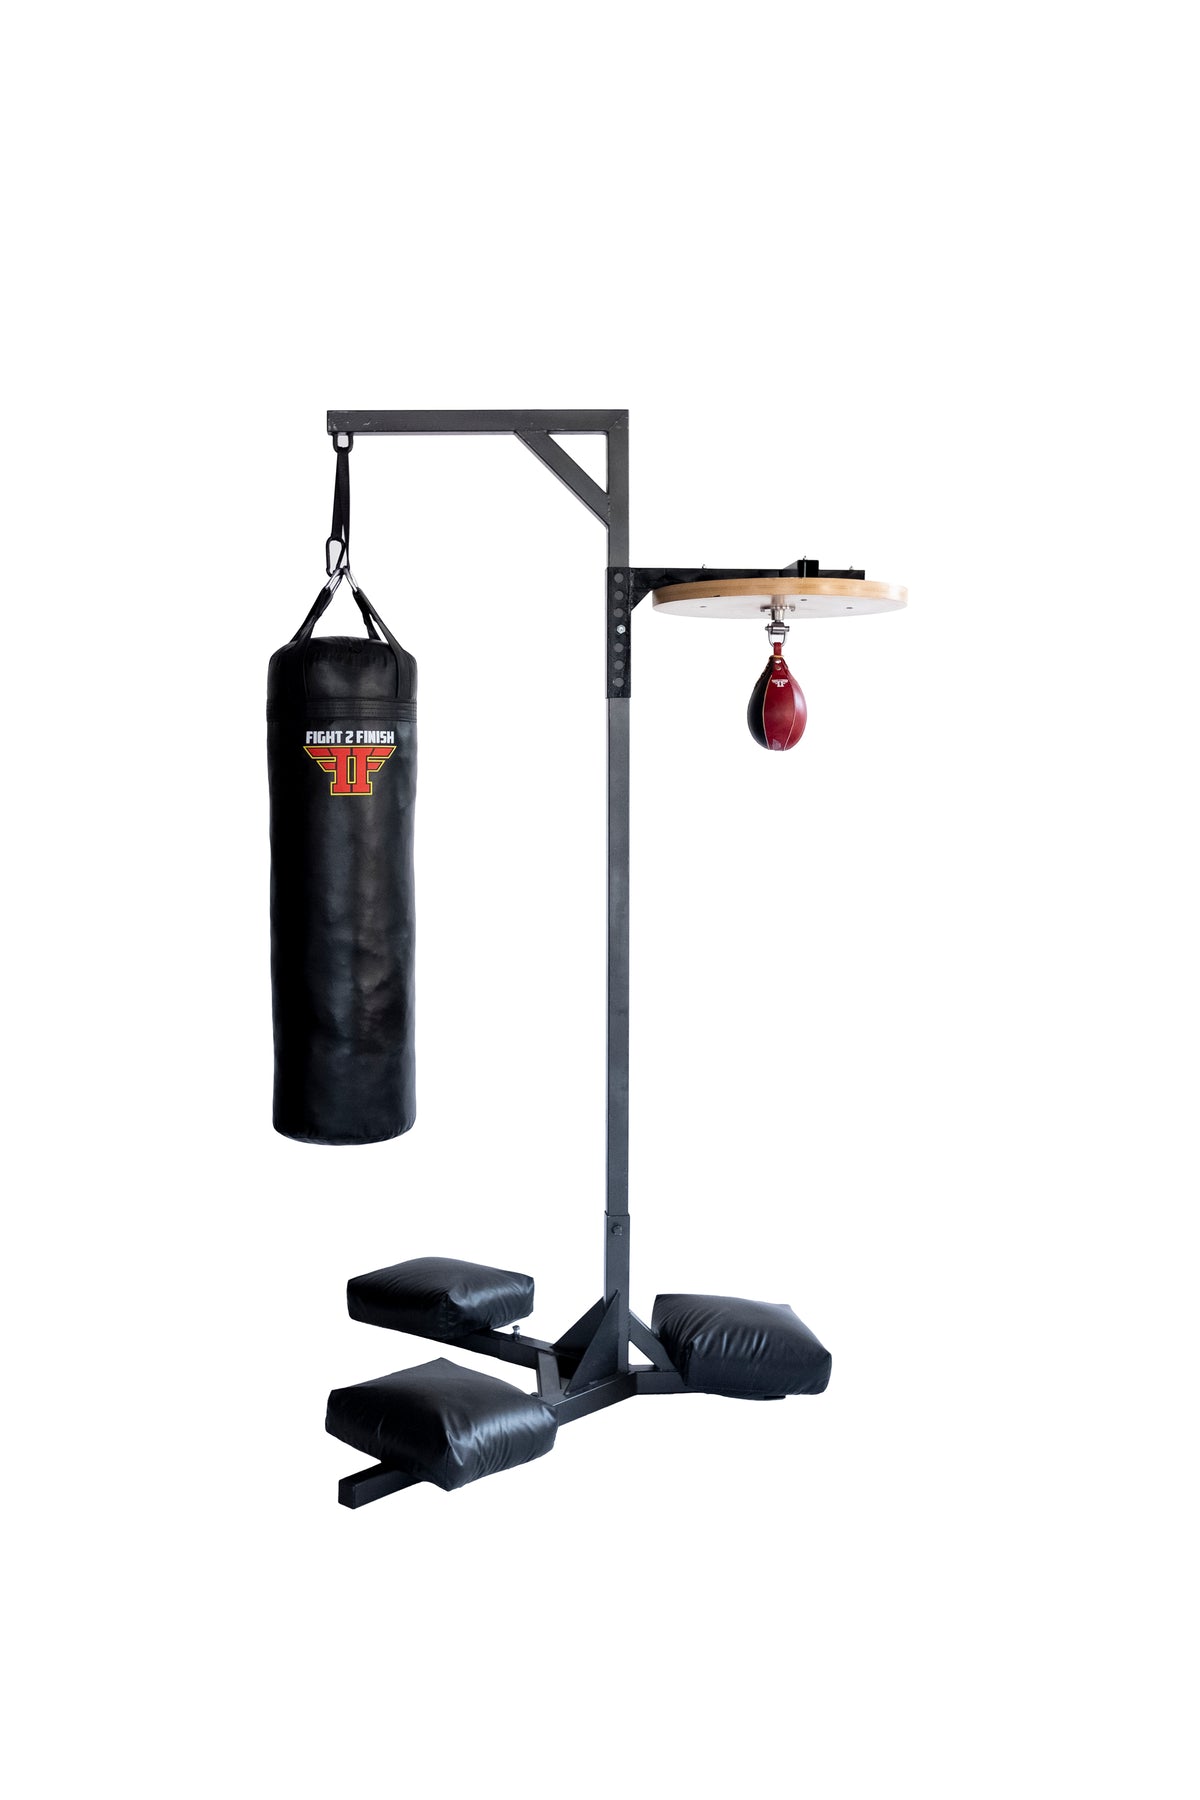 FIGHT 2 FINISH HEAVY BAG AND SPEED BAG STAND COMBO